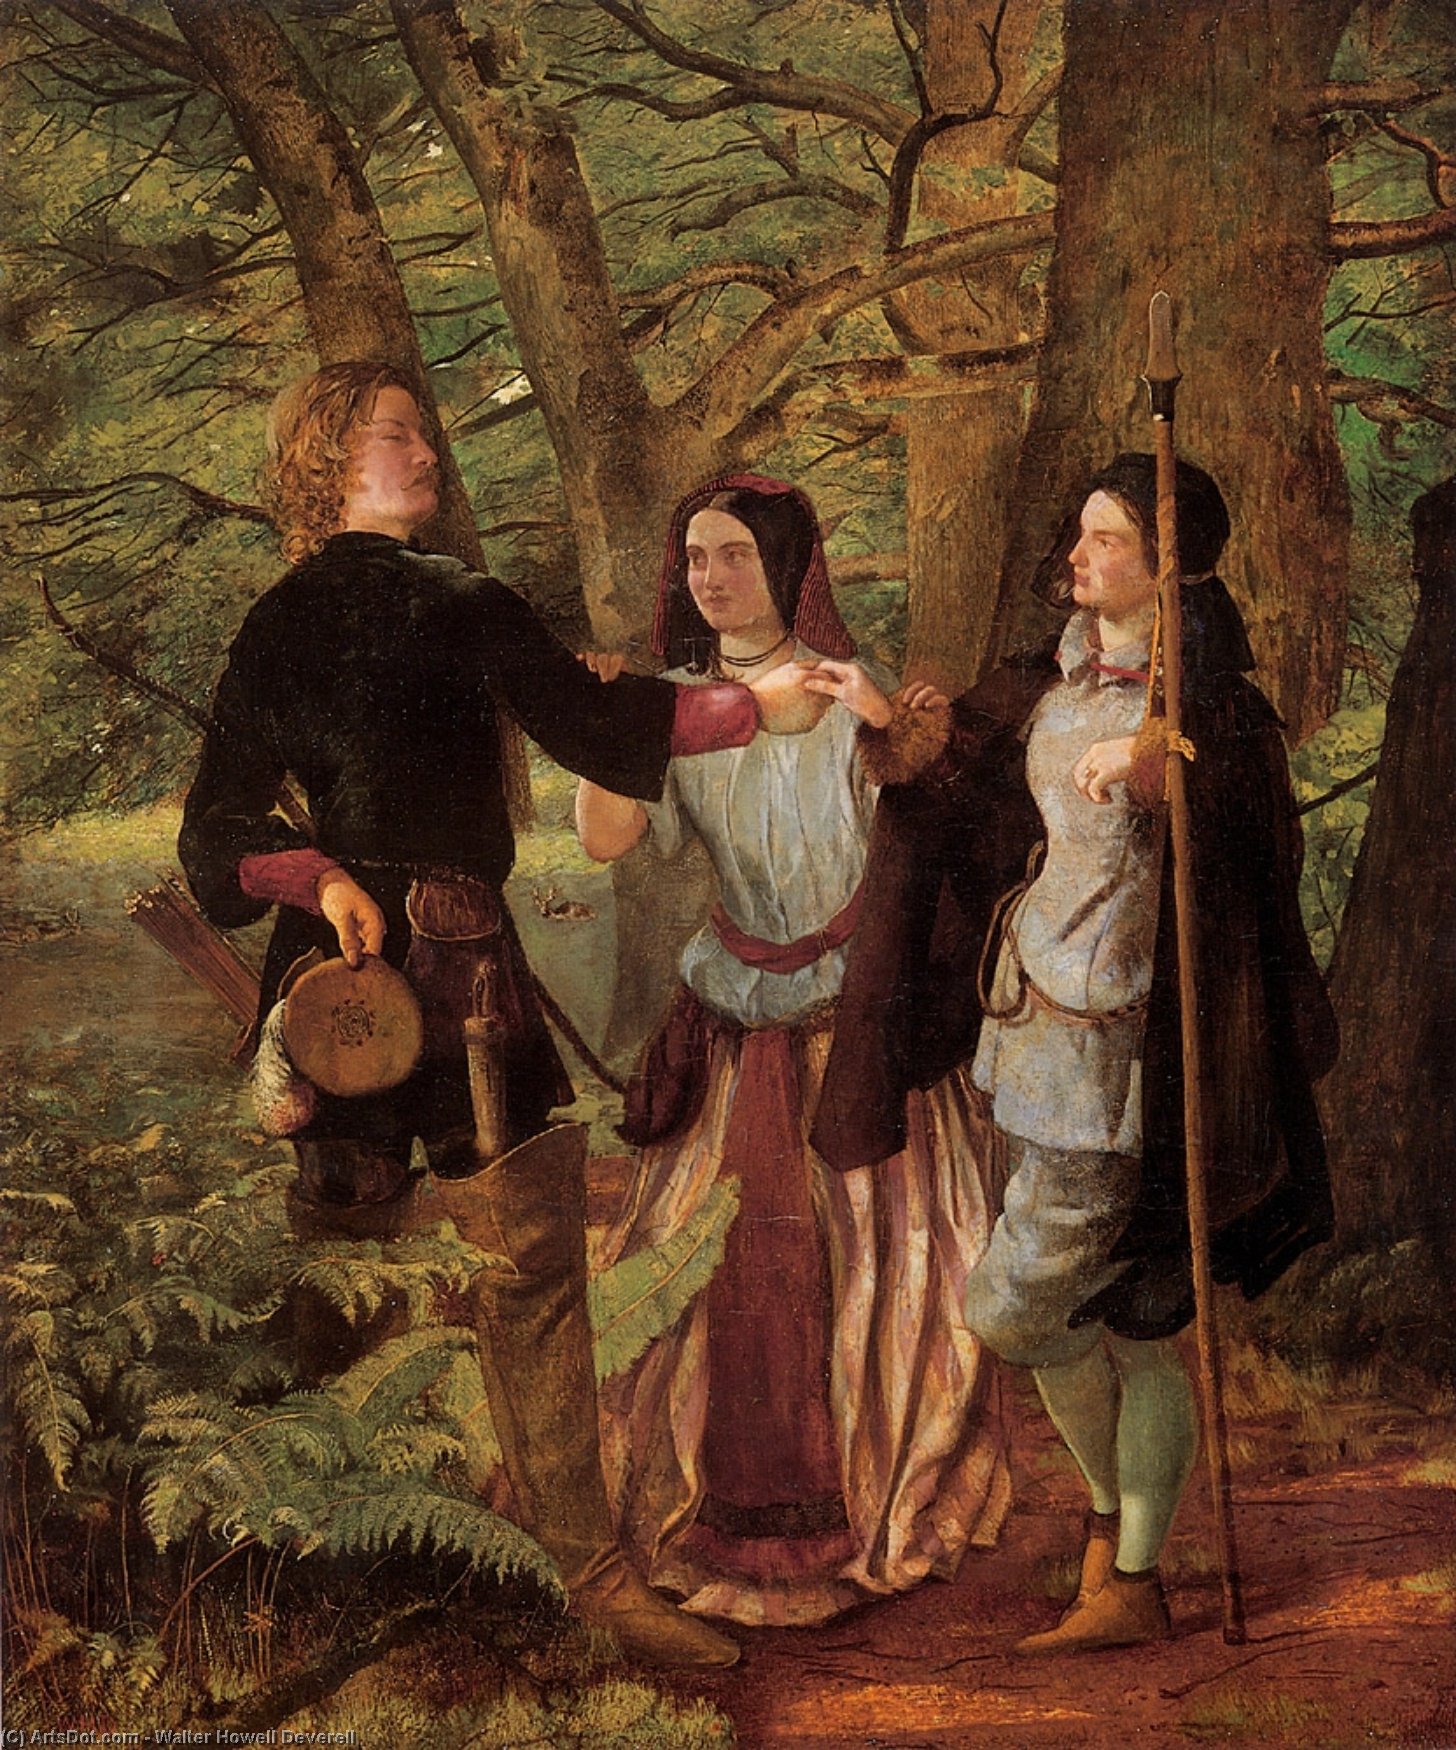 Buy Museum Art Reproductions The Mock Marriage of Orlando and Rosalin by Walter Howell Deverell (1827-1854) | ArtsDot.com